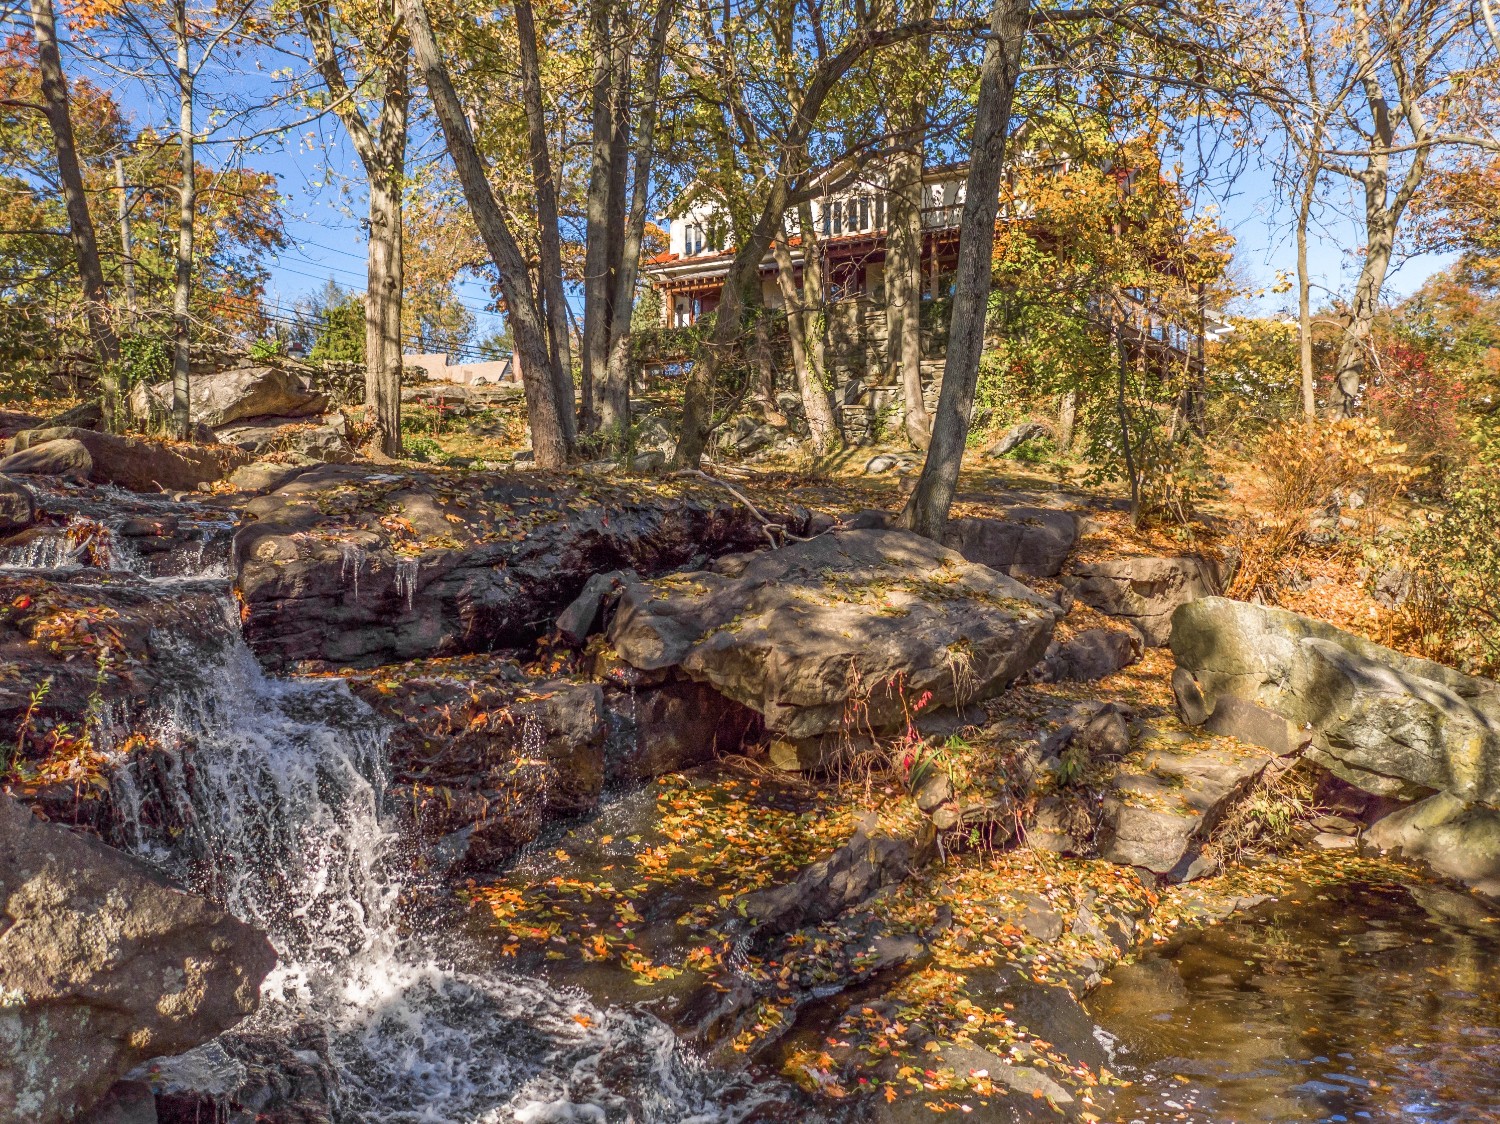 This $2.55M Westchester home has Arts & Crafts interiors and its own waterfall